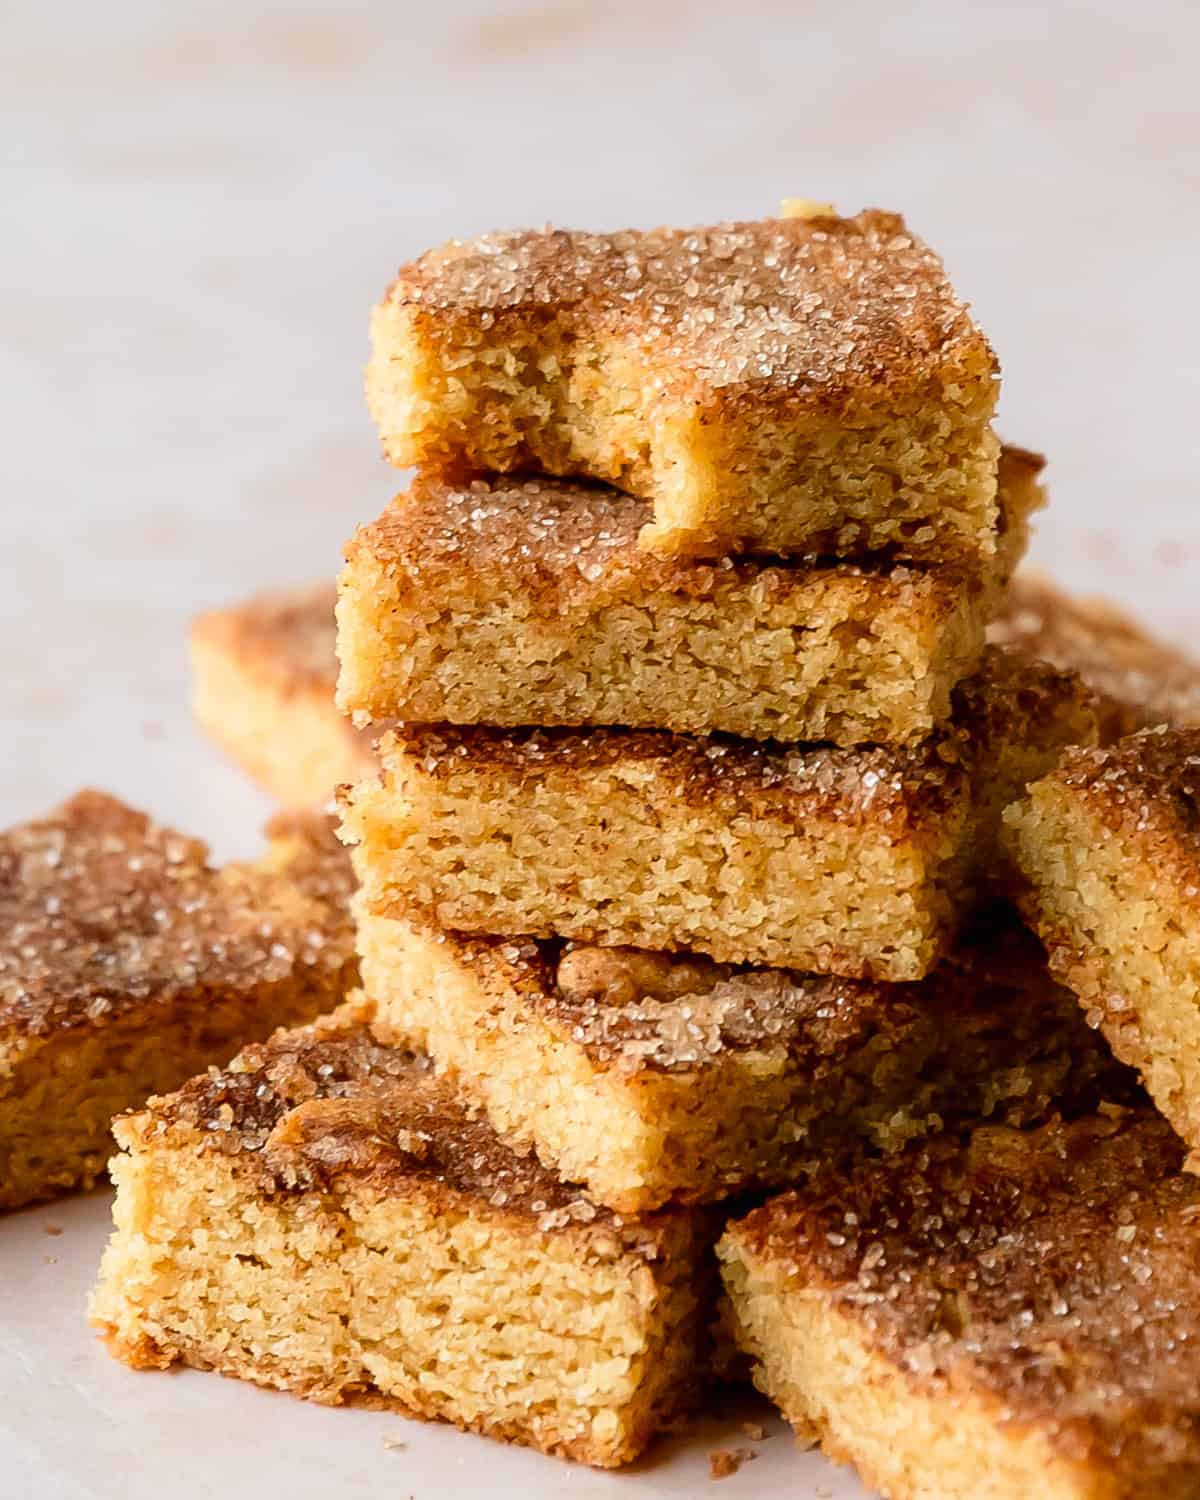 Snickerdoodle bars are soft and chewy, sweet and slightly tangy, cinnamon sugar coated snickerdoodle cookies made into wonderfully easy to make cookie bars. These snickerdoodle cookie bars are no chill, require no rolling and are the perfect dessert to feed a crowd. Make these cinnamon sugar bar cookies the next time you want a pan full of cozy and flavorful cookies.